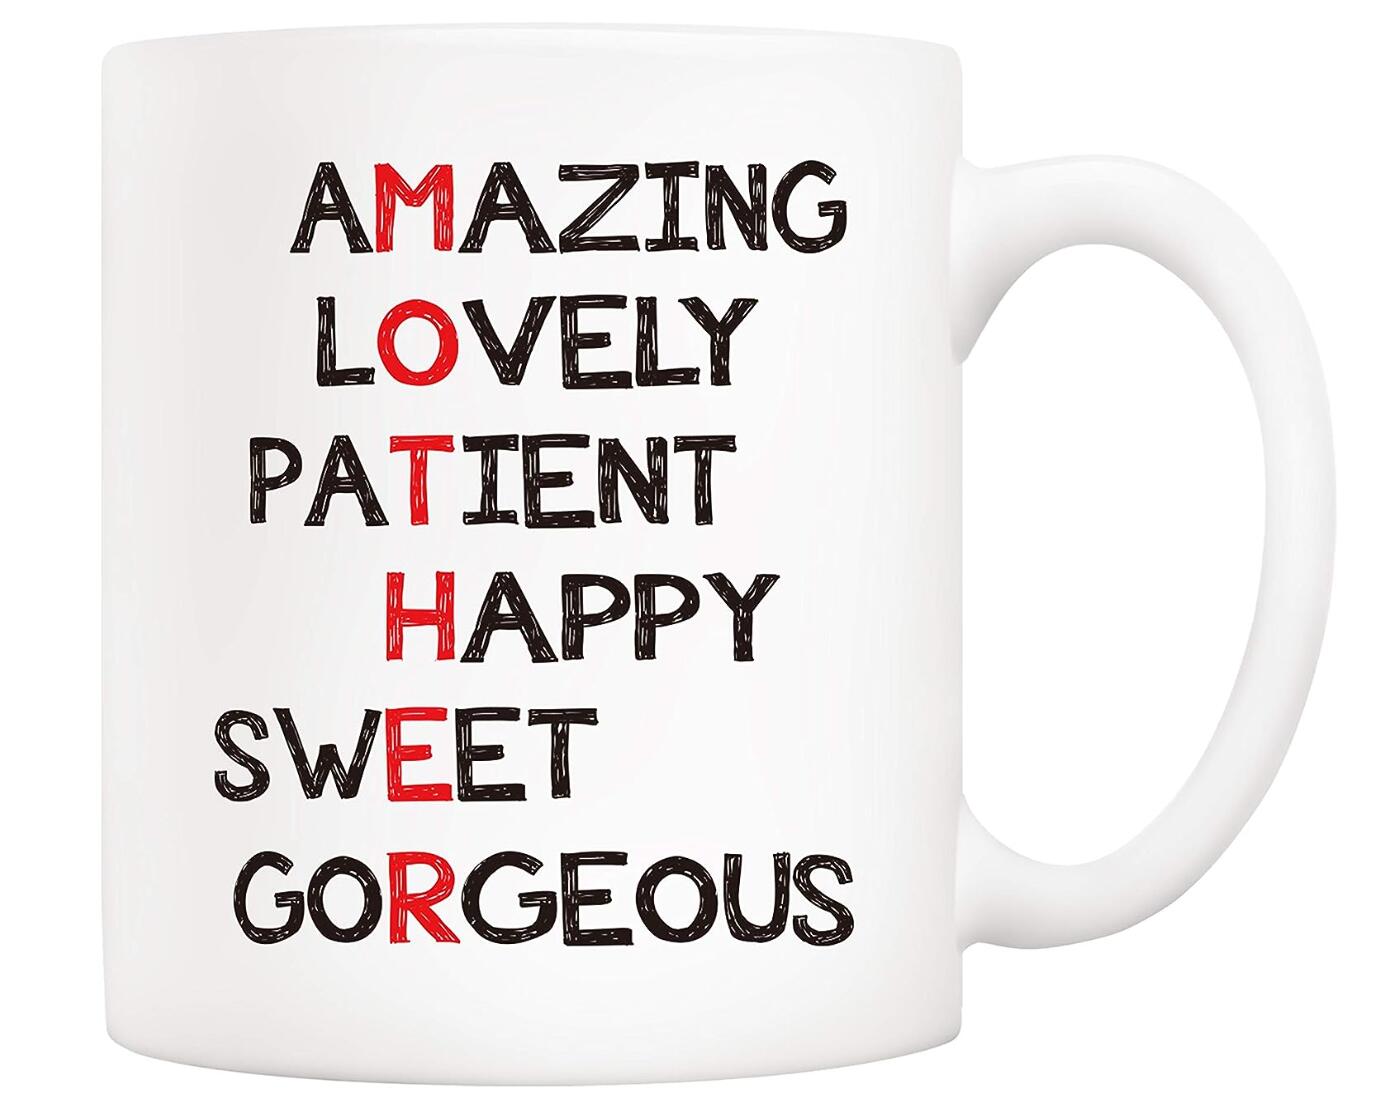 Amazing Lovely Patient Happy Sweet Gorgeous Coffee Mug Christmas Gifts Unique Cup